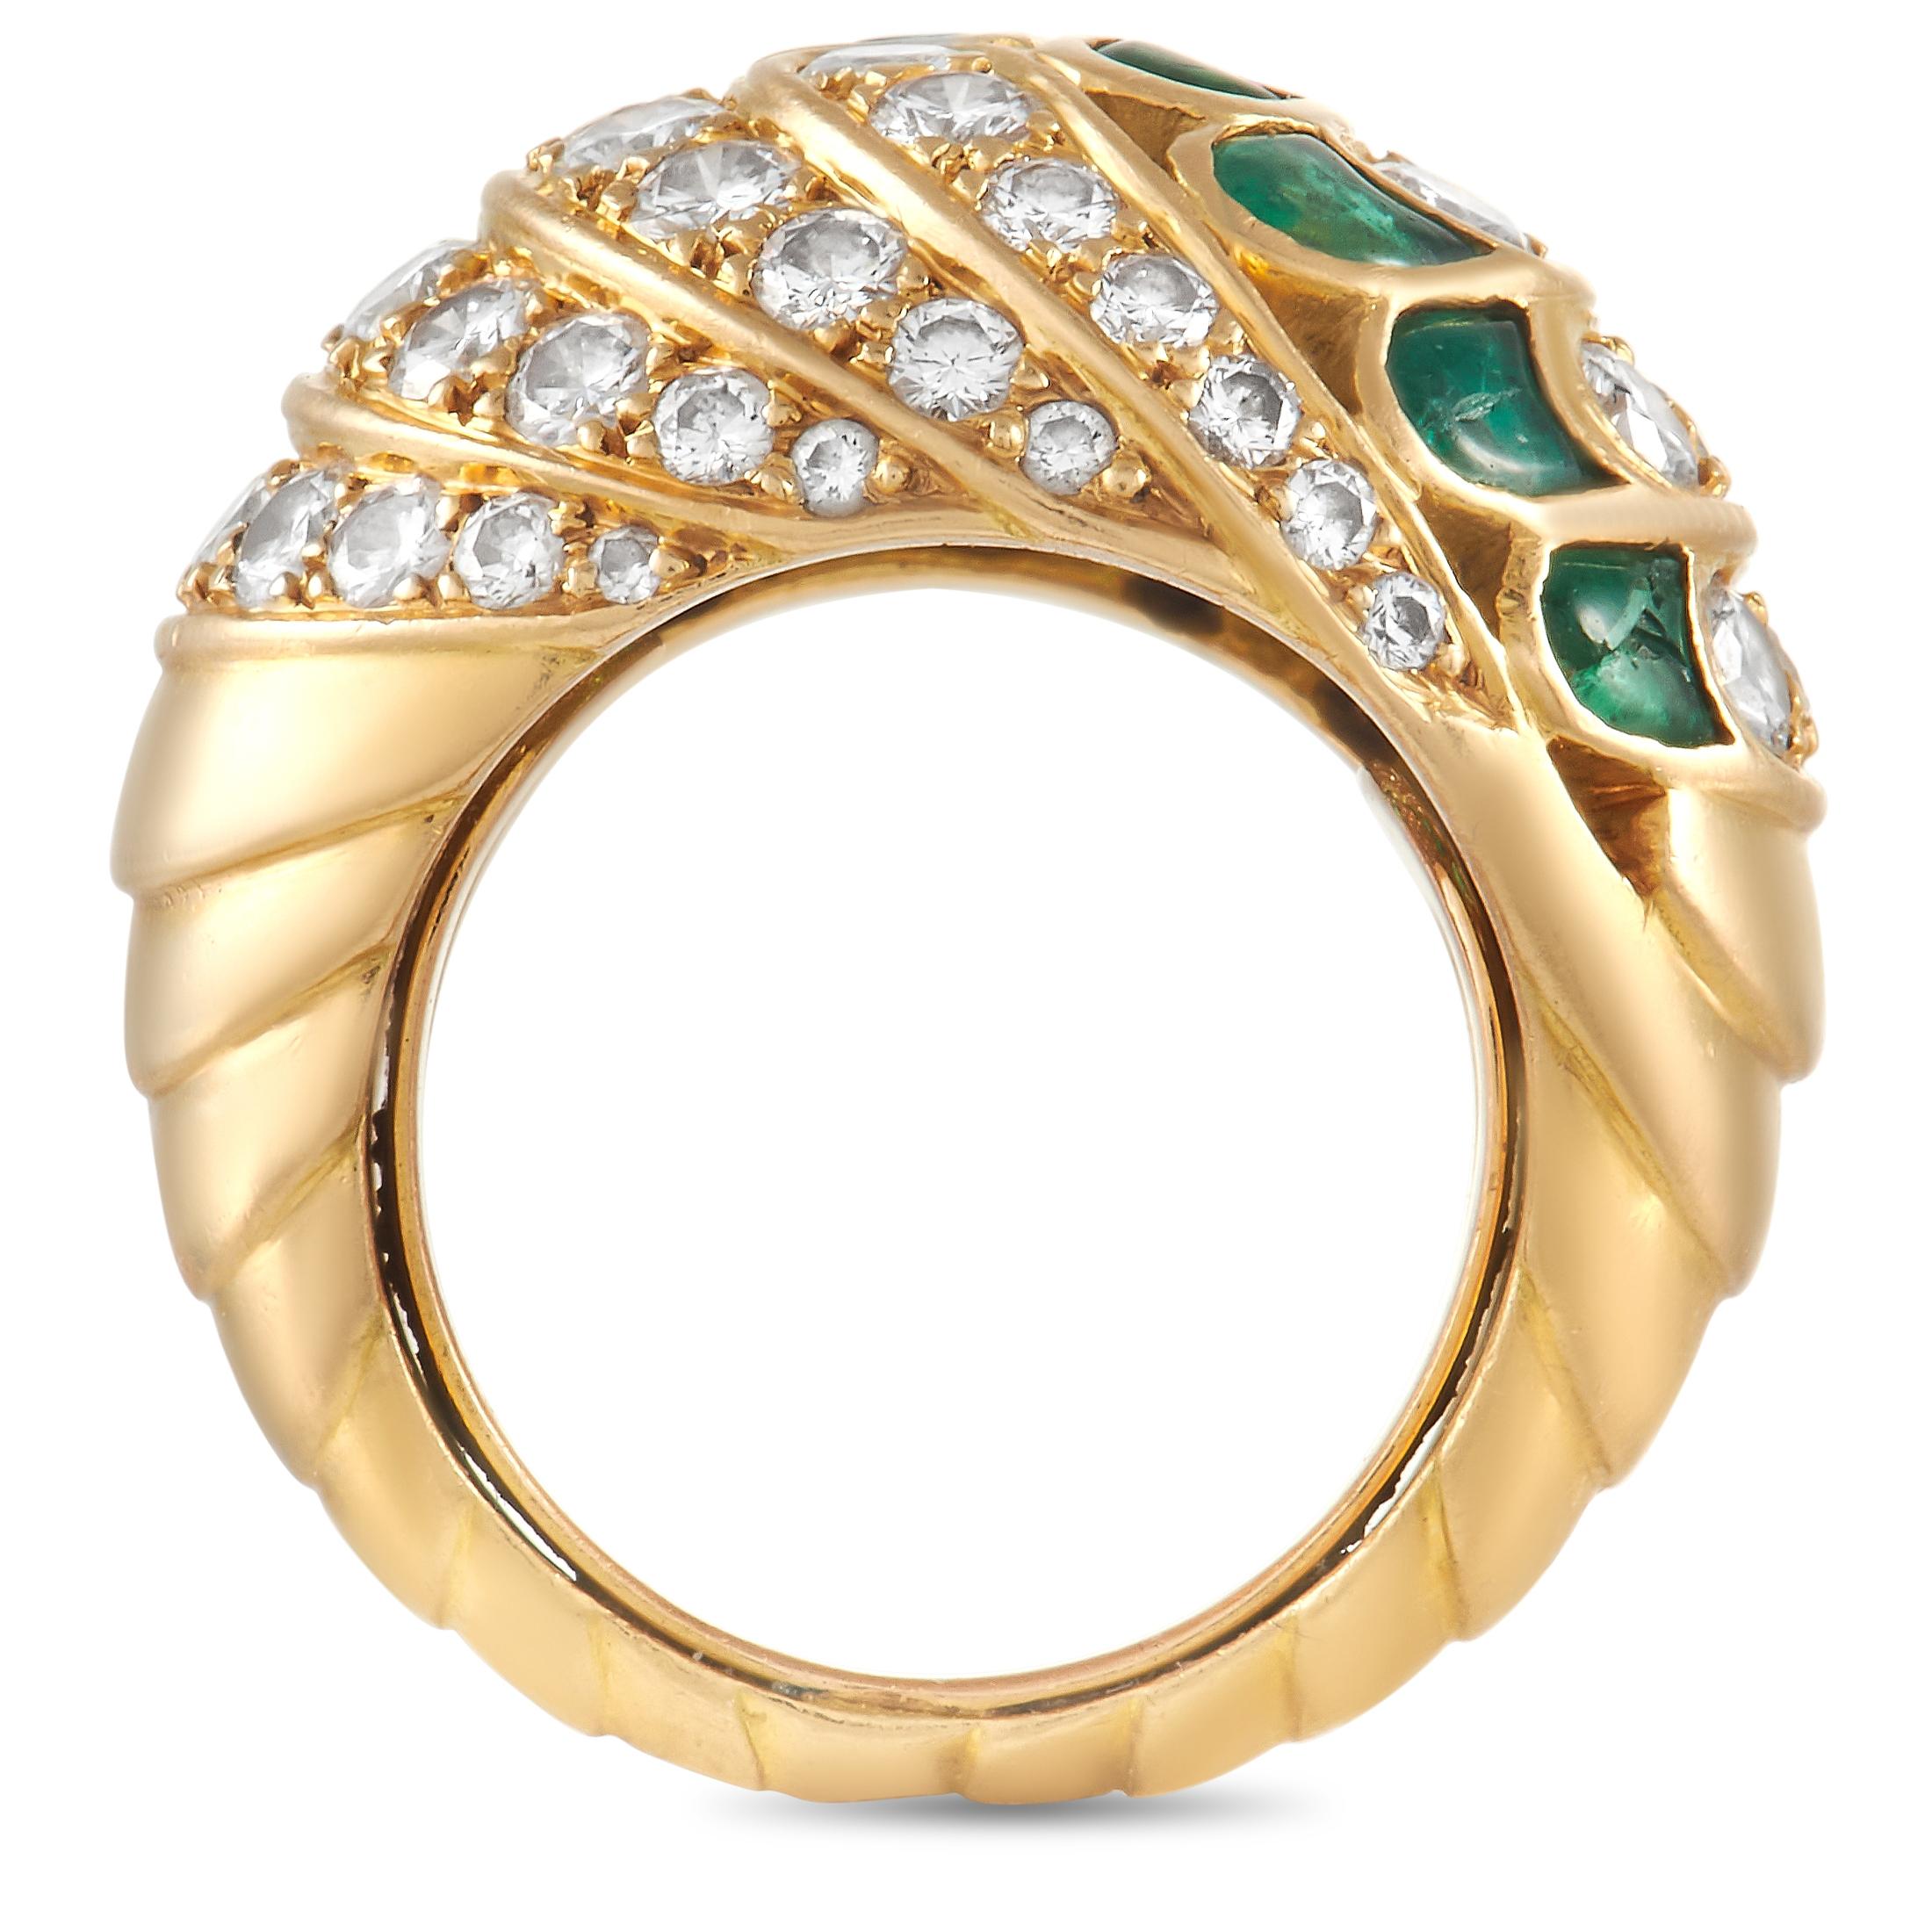 There’s something special about this bold, dynamic ring from Piaget. Incredibly opulent, the statement-making 18K Yellow Gold setting features a band width and top height measuring 8mm. Diamonds with a total weight of 2.25 carats add extra elegance,